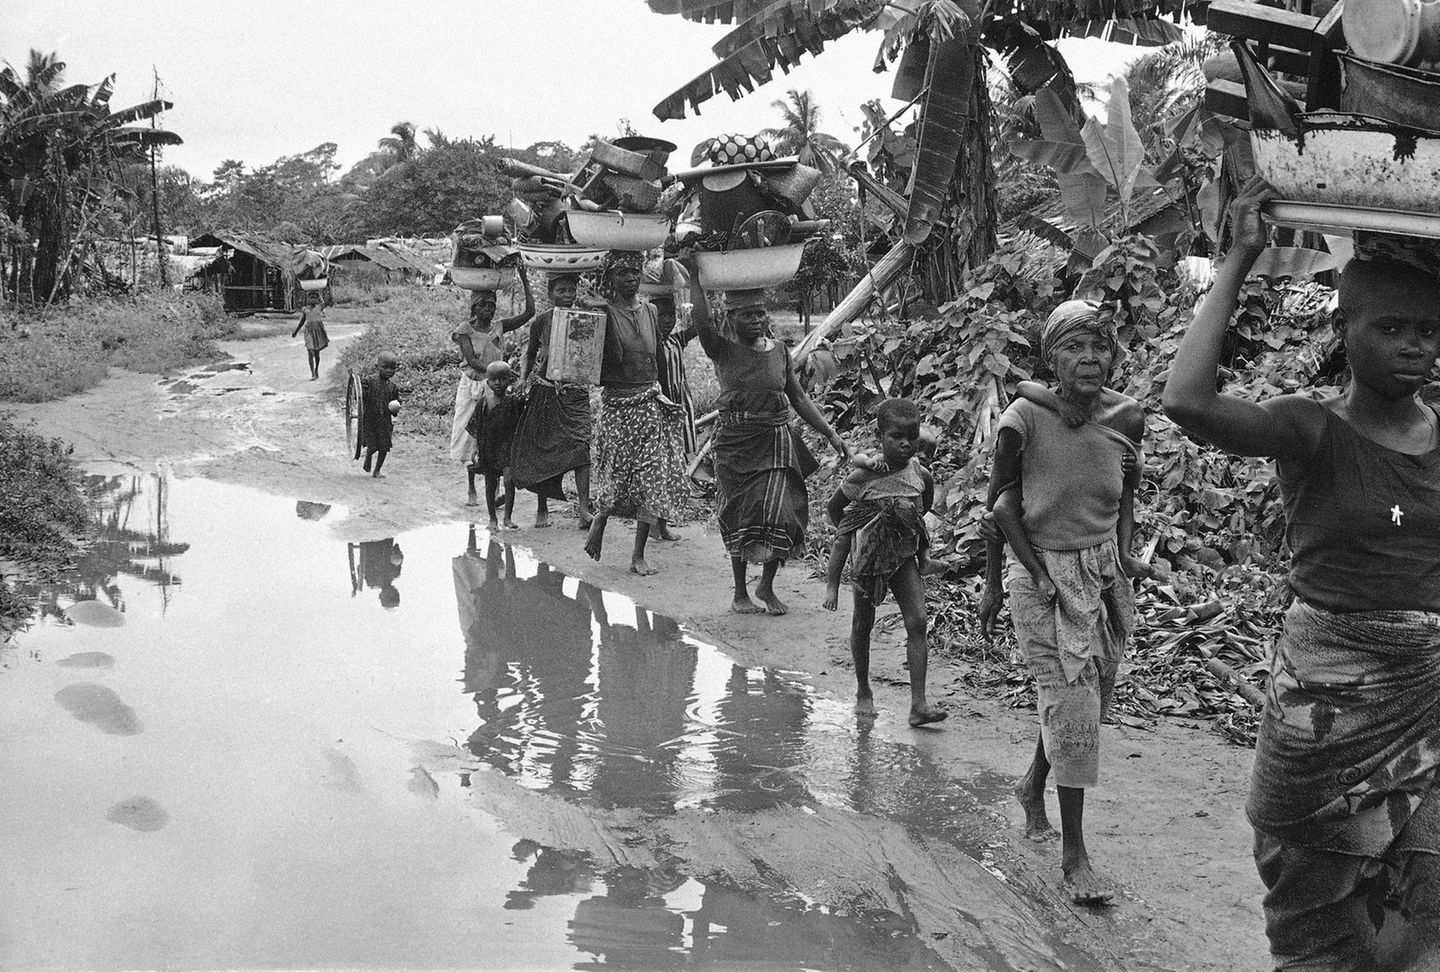 Keywords=XGV2011 Country/Primary Location Code=NGA Image Orientation=landscape Coded Character Set=UTF-8 By-line=Dennis Lee Royle Caption/Abstract=Ibo refugees from the breakaway Nigerian state of Biafra carry household goods on their heads as they flee advancing federal Nigerian troops near Owerri, Sept. 1968. Youngster at right carries another child. (AP Photo/Dennis Lee Royle)